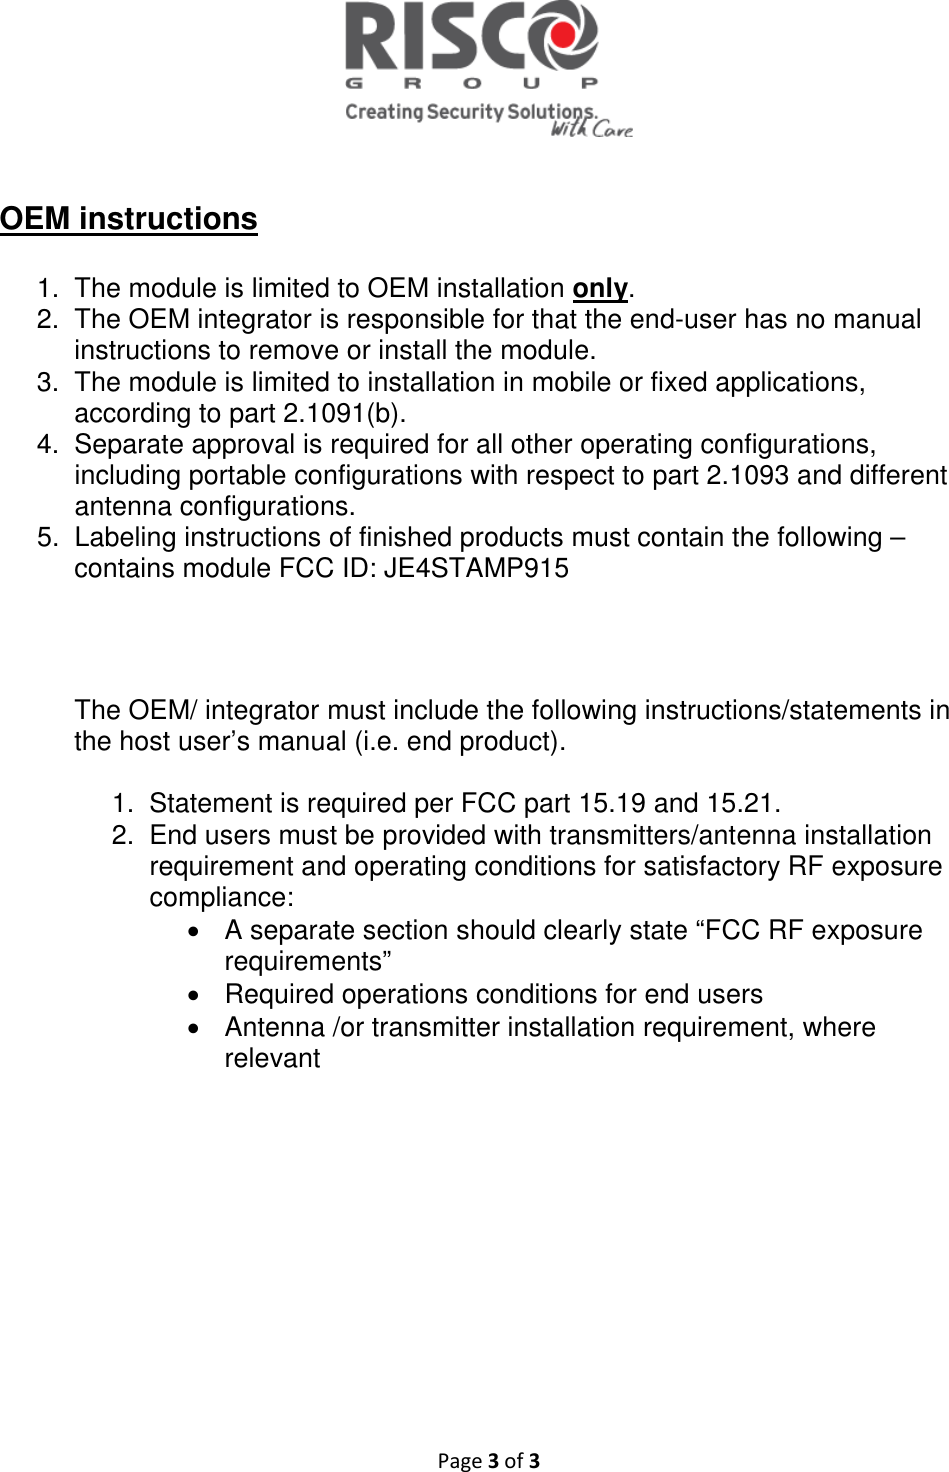   Page 3 of 3   OEM instructions  1.  The module is limited to OEM installation only. 2.  The OEM integrator is responsible for that the end-user has no manual instructions to remove or install the module. 3.  The module is limited to installation in mobile or fixed applications, according to part 2.1091(b). 4.  Separate approval is required for all other operating configurations, including portable configurations with respect to part 2.1093 and different antenna configurations. 5.  Labeling instructions of finished products must contain the following – contains module FCC ID: JE4STAMP915      The OEM/ integrator must include the following instructions/statements in the host user’s manual (i.e. end product).  1.  Statement is required per FCC part 15.19 and 15.21. 2.  End users must be provided with transmitters/antenna installation requirement and operating conditions for satisfactory RF exposure compliance: •  A separate section should clearly state “FCC RF exposure requirements”  •  Required operations conditions for end users •  Antenna /or transmitter installation requirement, where relevant   